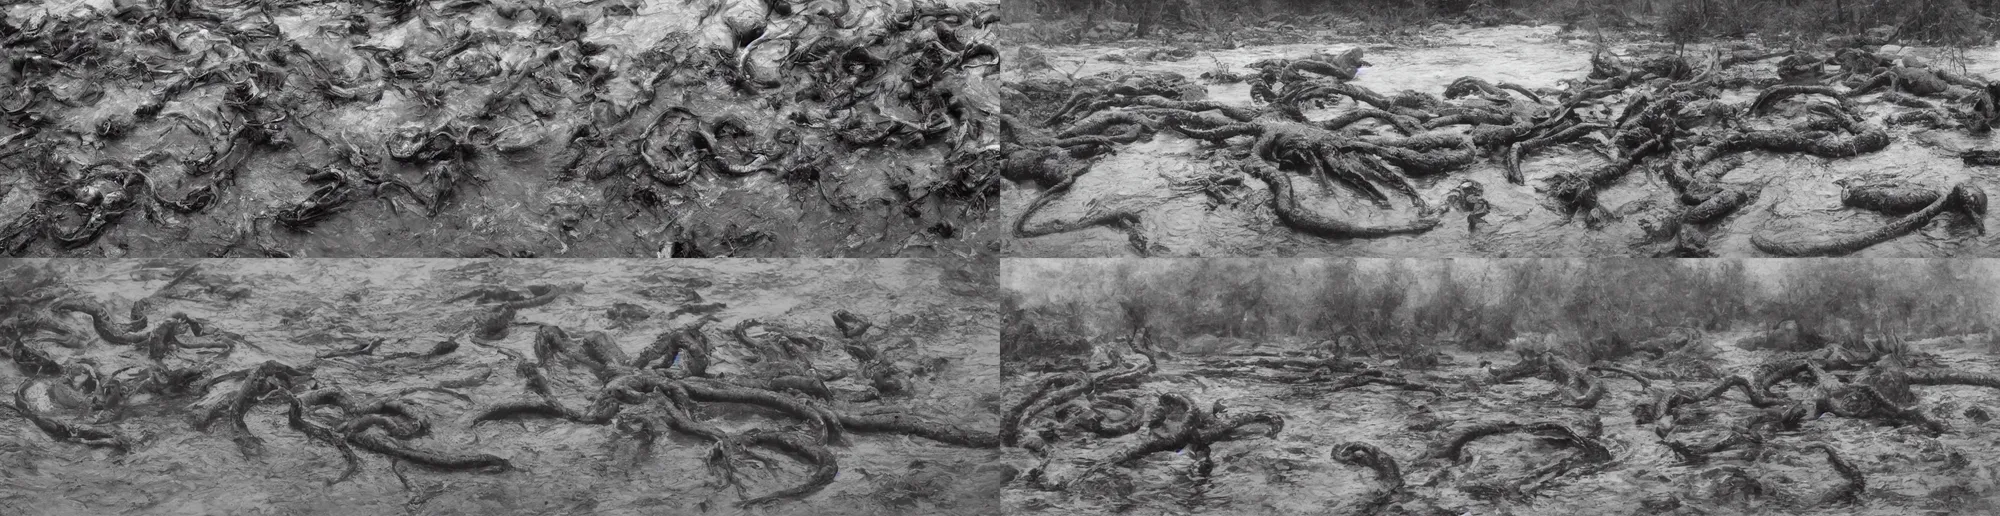 Prompt: wide angle river, low angle panorama scary unproportionable dead body of oversized giant octopus on side of the tribal river next to fismen standing in water, heavy vignette!, dramatic dark ,grayscale 1900s picture